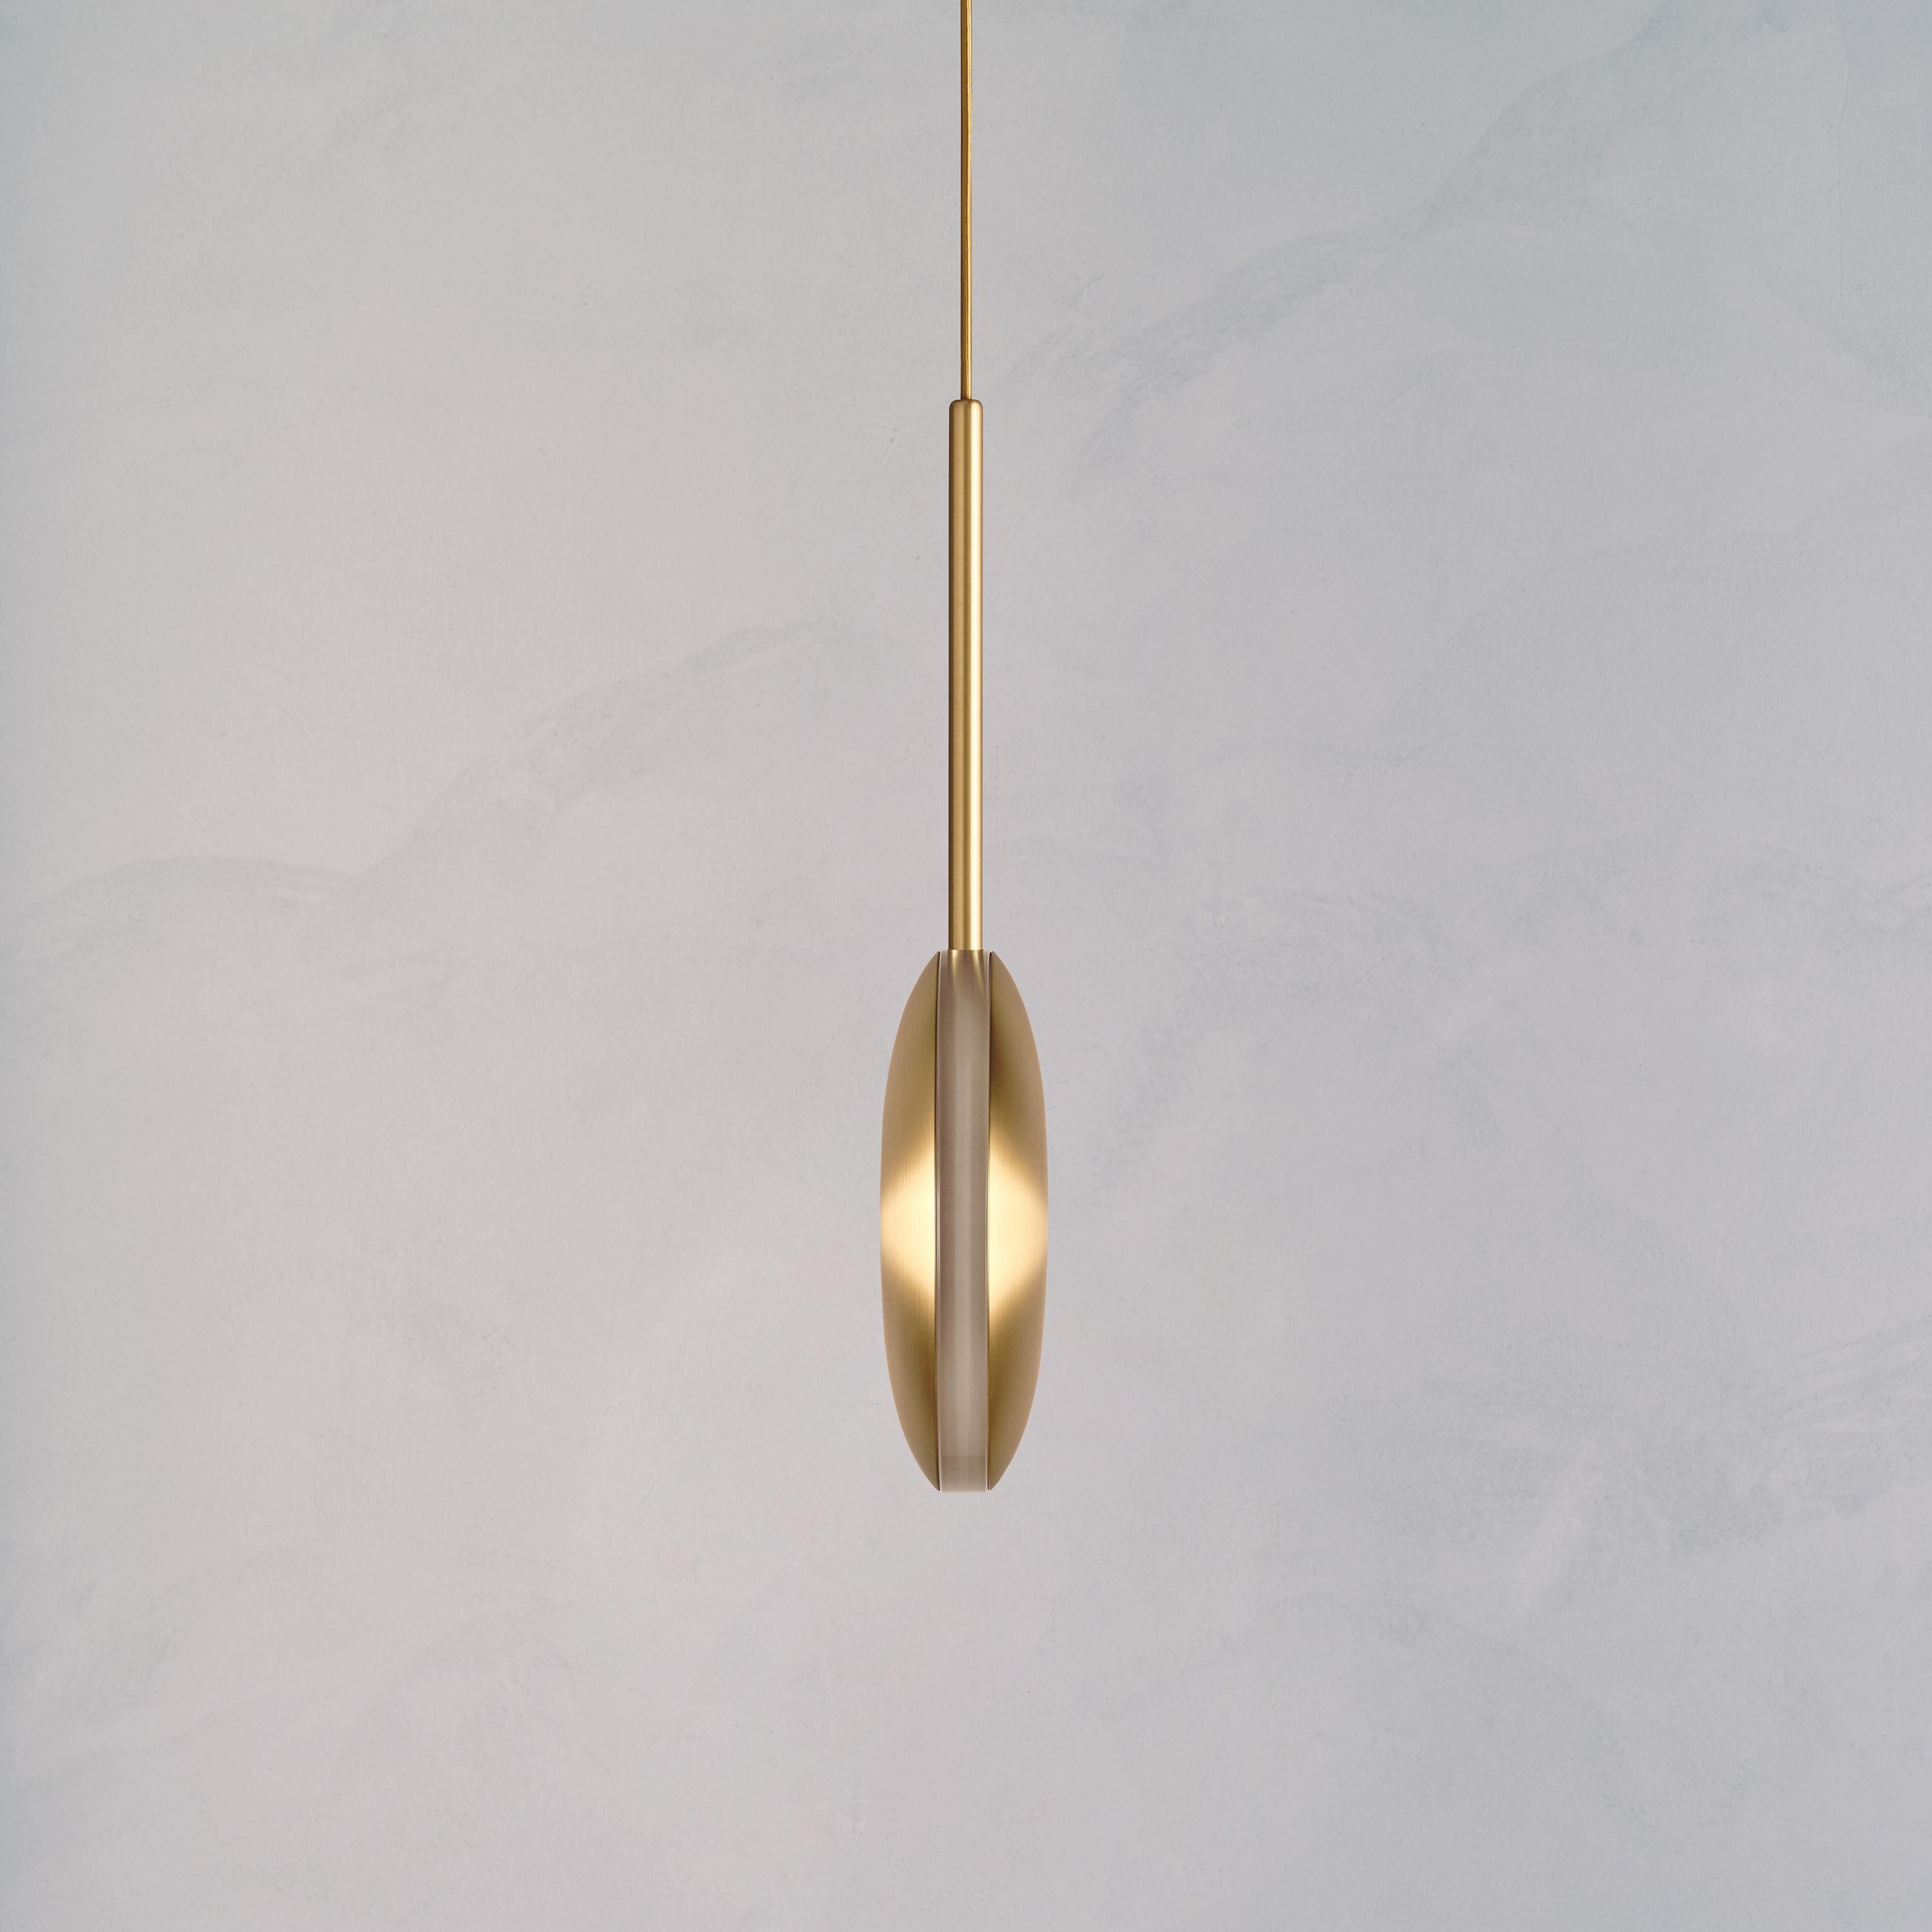 Cosmic 'Comet Pendant Sol' Handmade Artisan Pure Satin Brass Ceiling Light In New Condition For Sale In London, GB